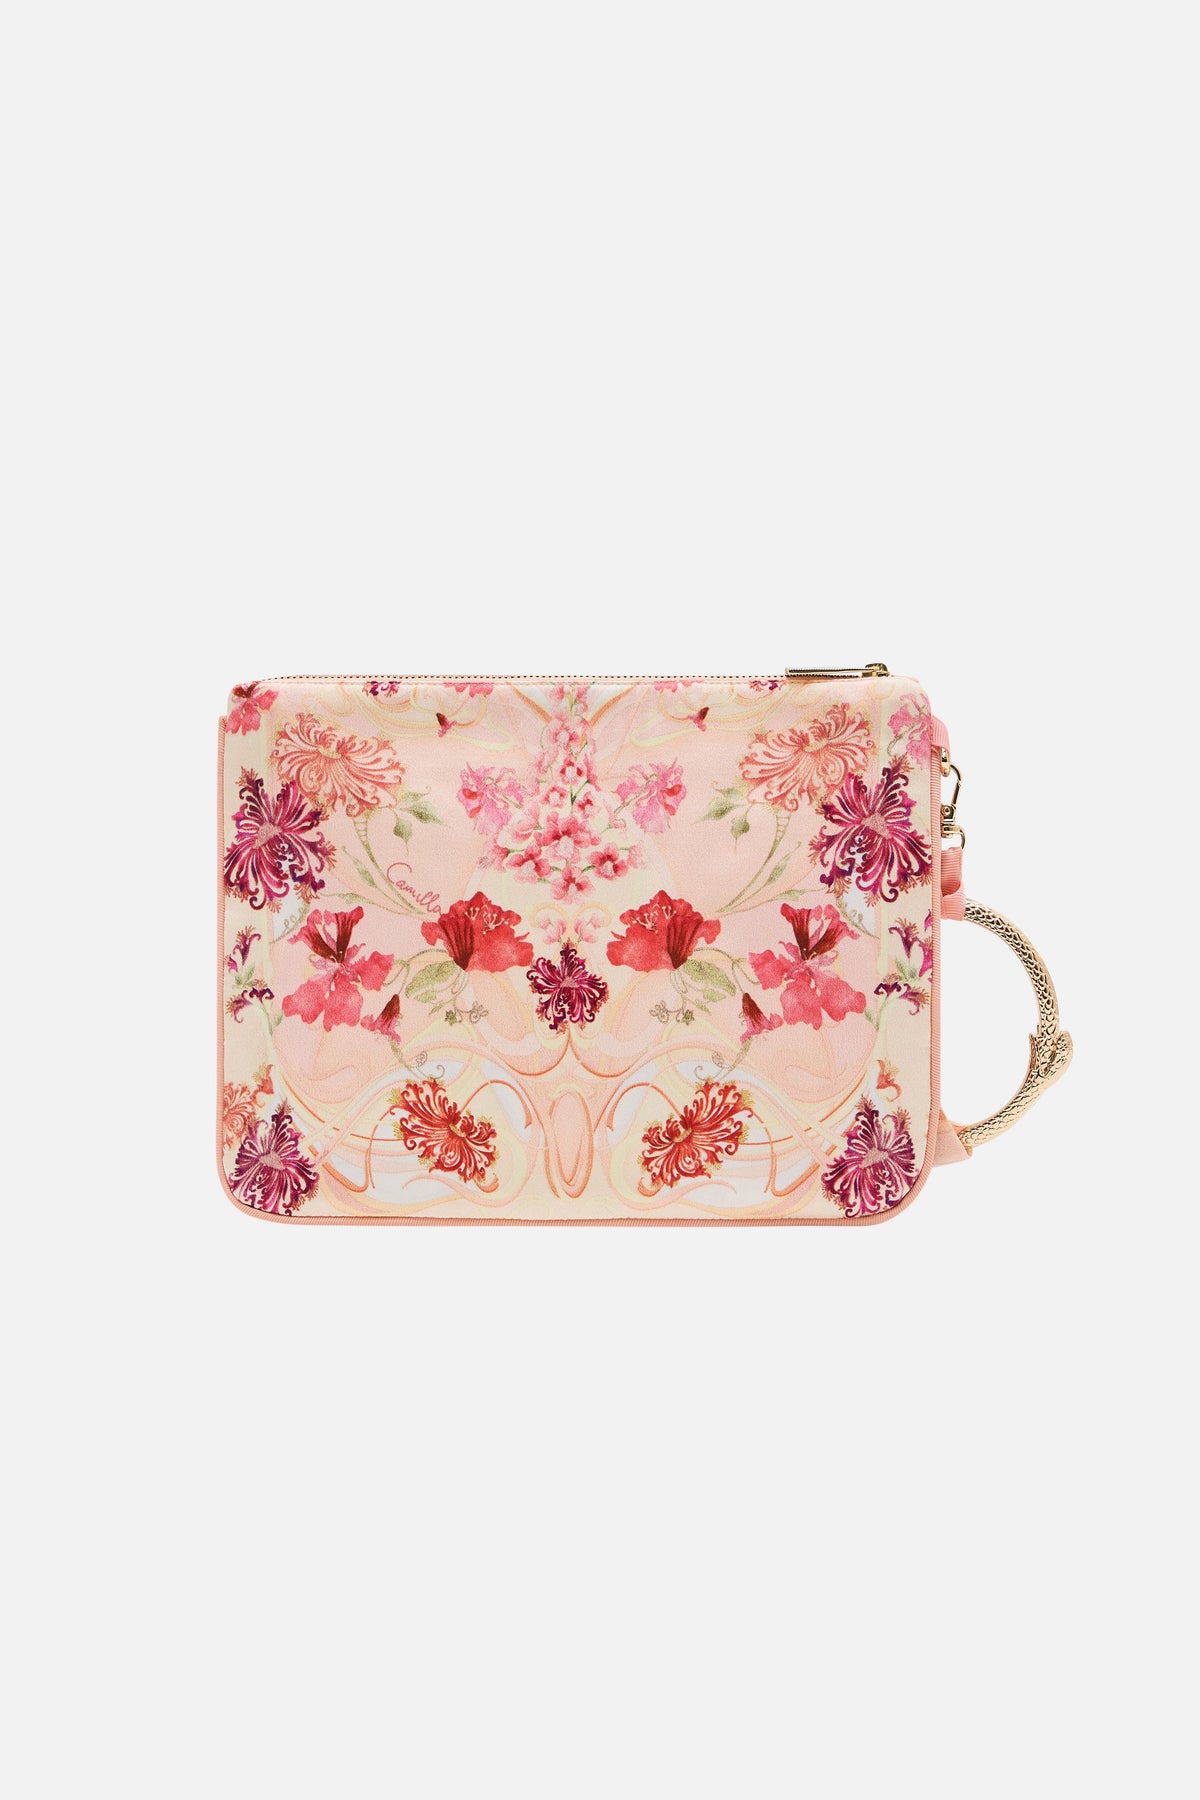 CAMILLA floral ring scarf clutch in Blossoms and Brushstrokes